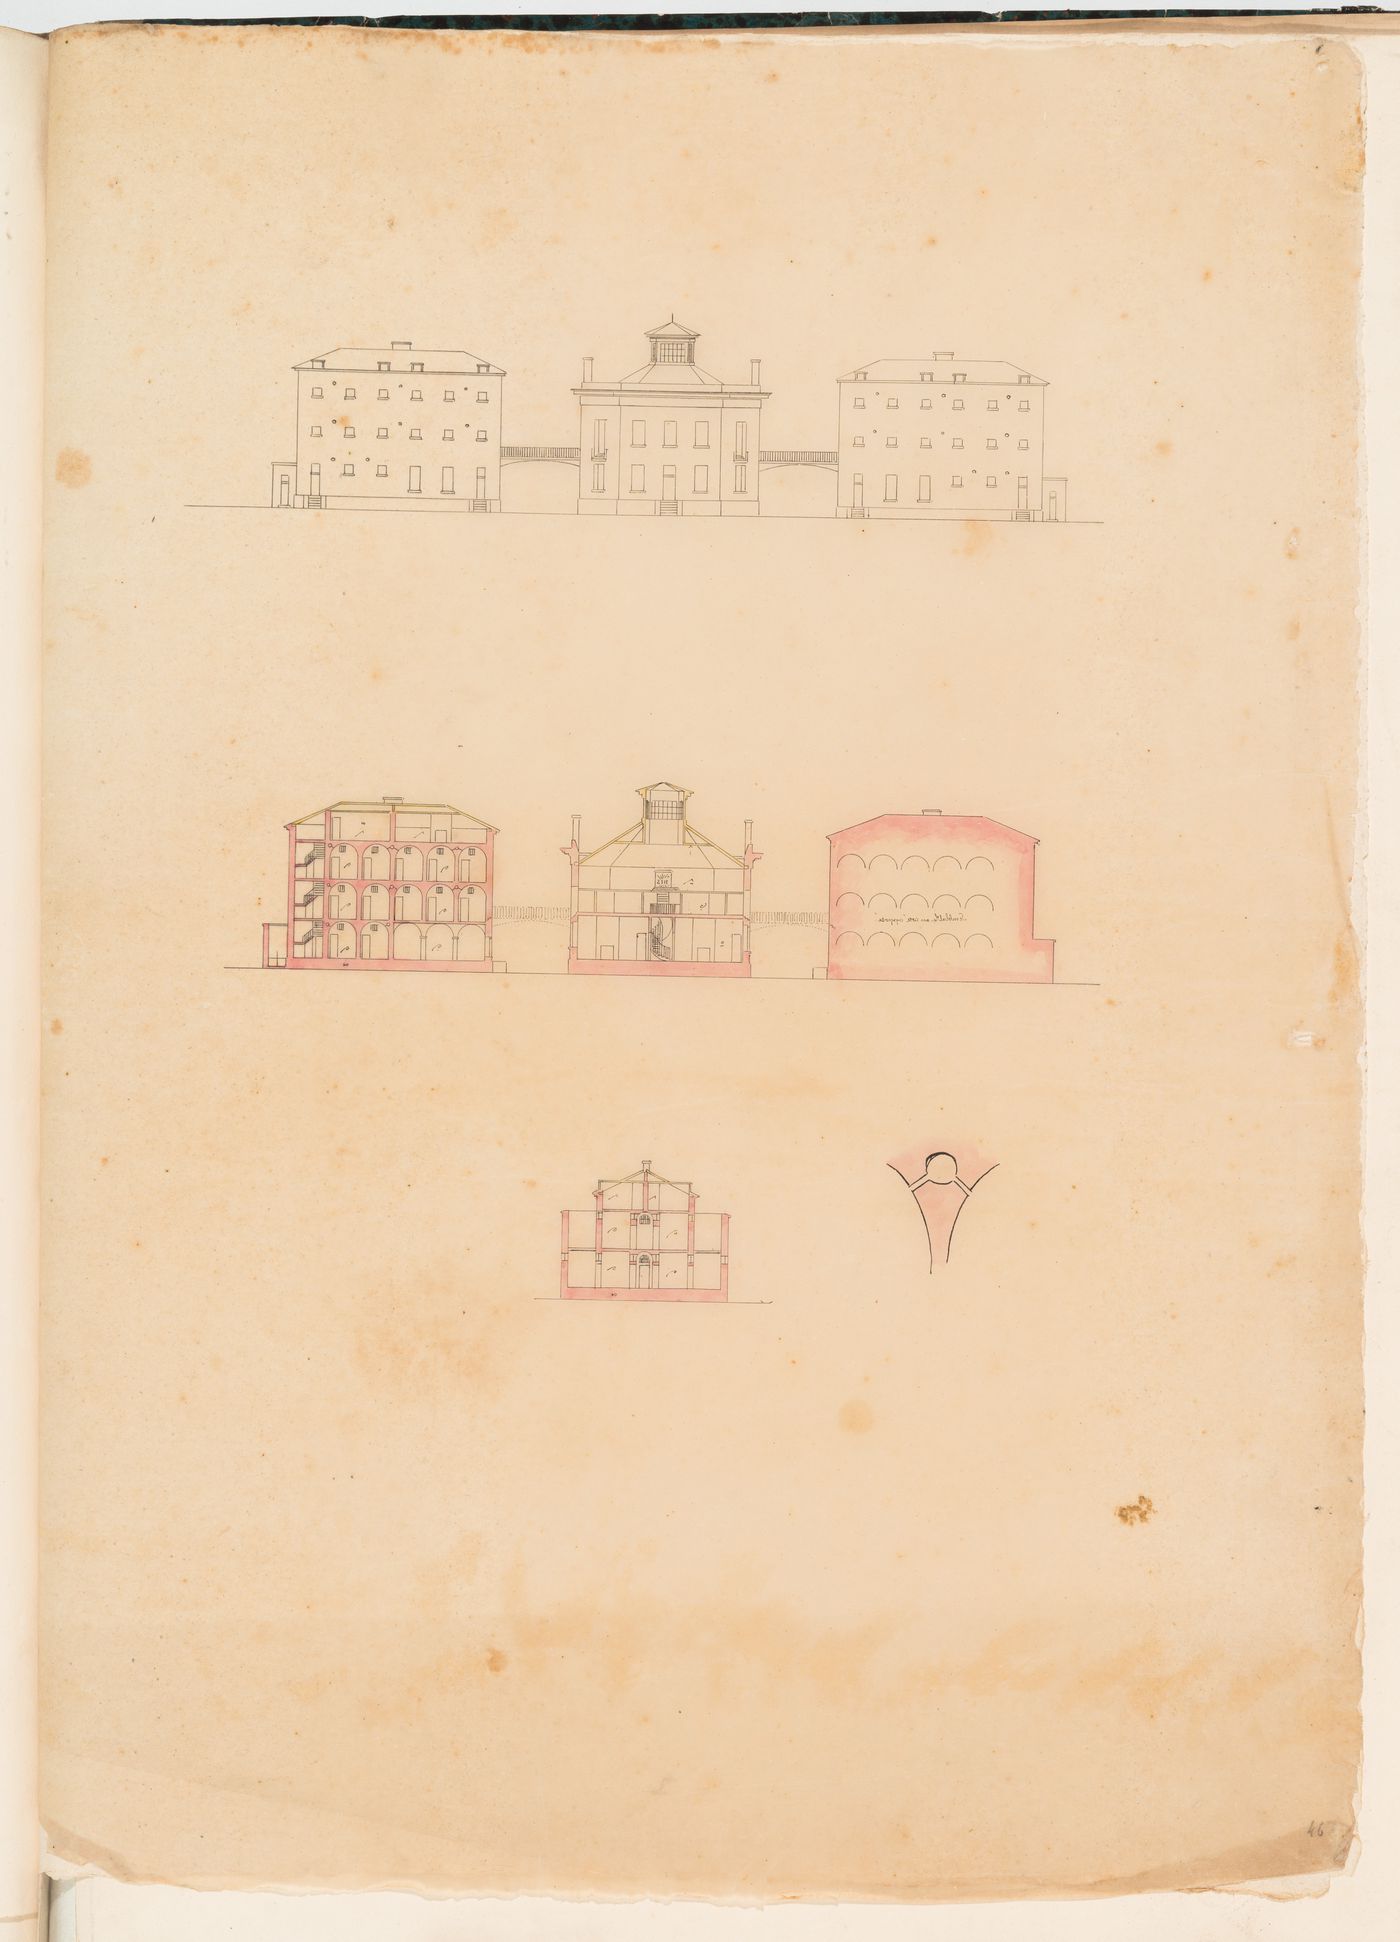 Ipswich County Goal [?], England: Elevation and sections